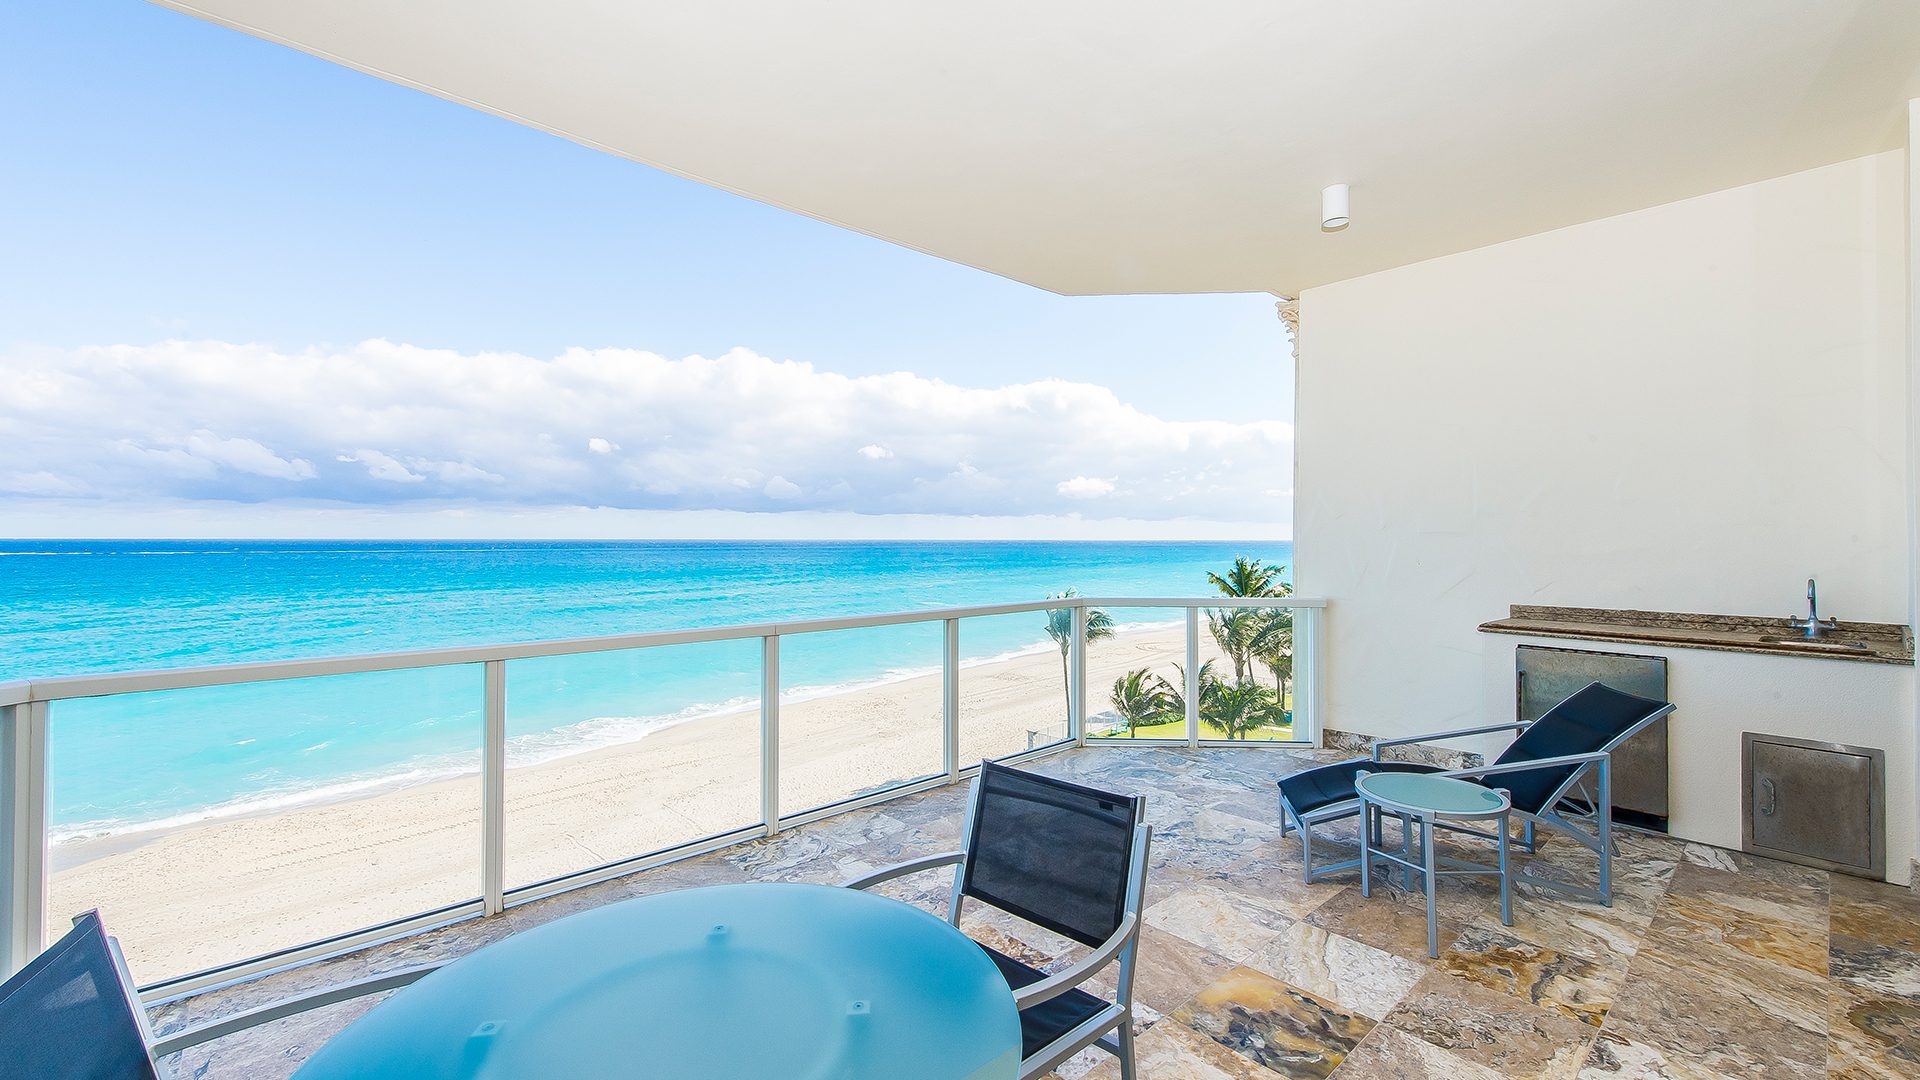 Ocean Views from Residence 507 at Bellaria, Luxury Oceanfront Condominiums in Palm Beach, Florida 33480.